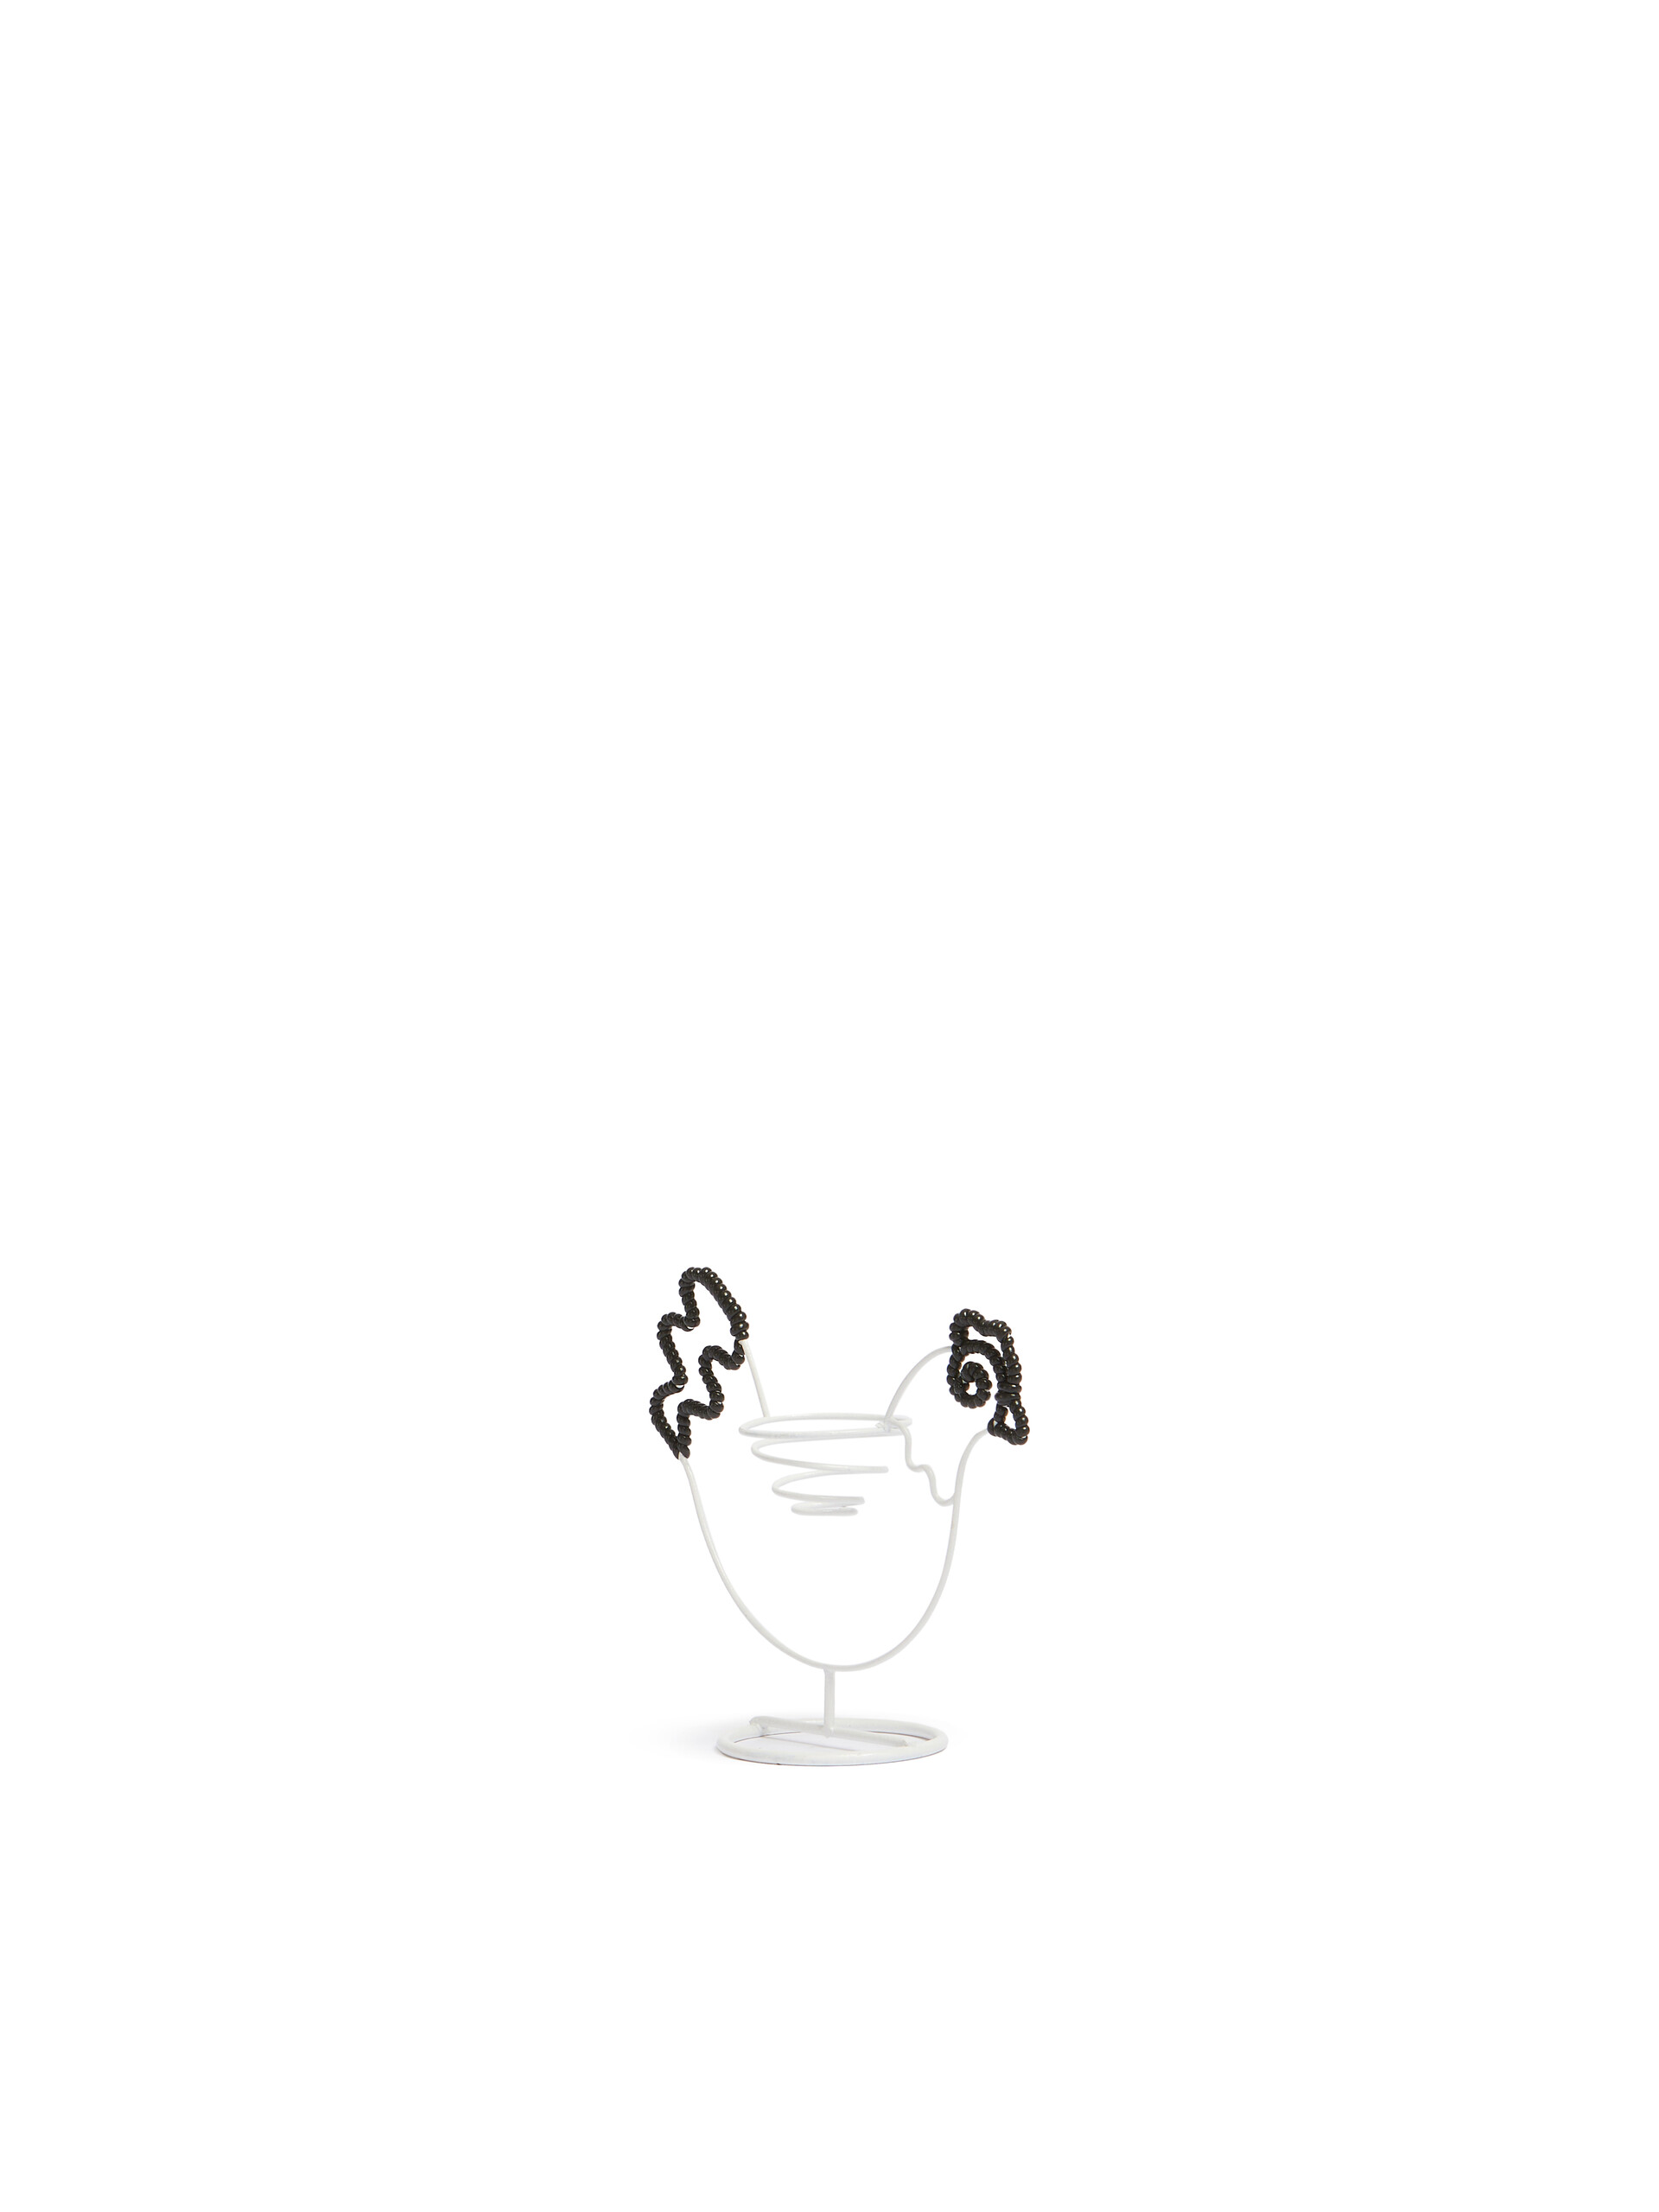 Black and white Marni Market Wire Egg Cup - Furniture - Image 2